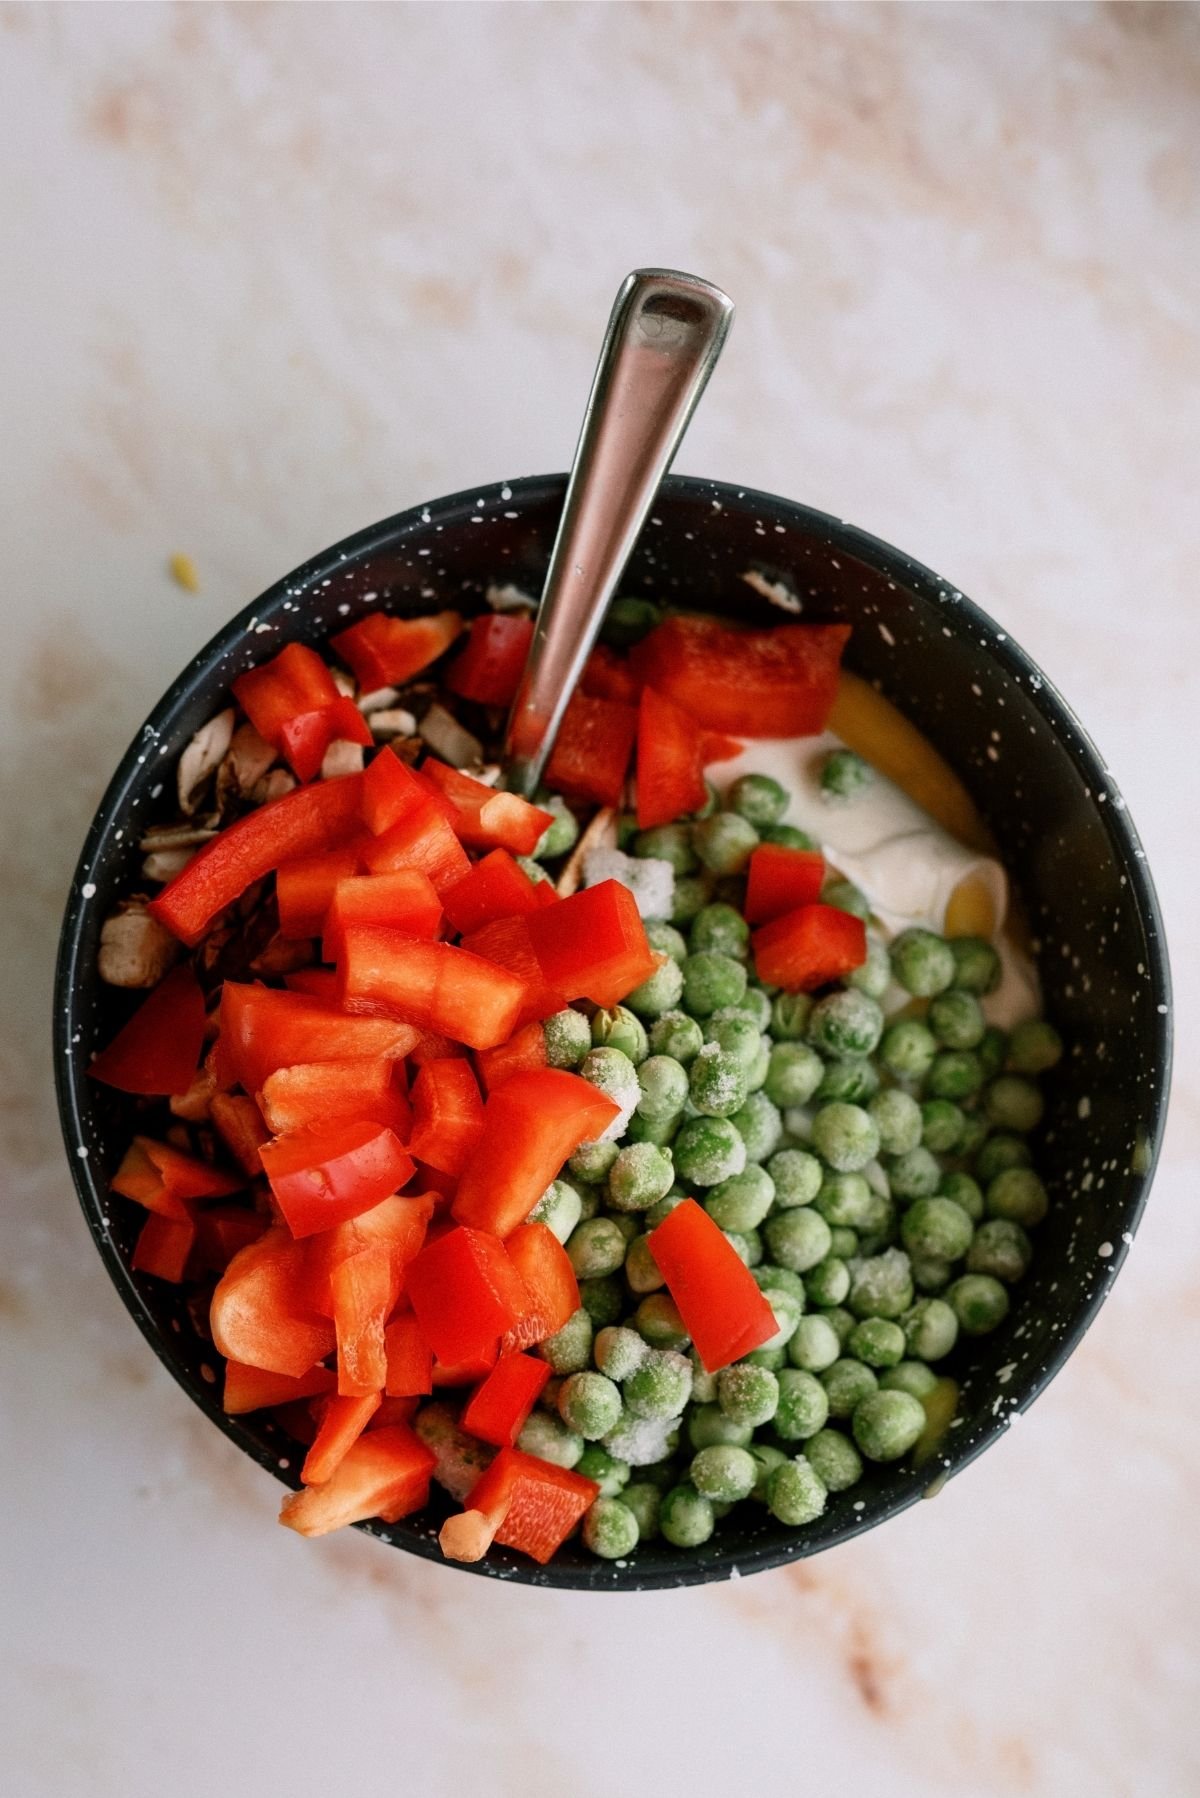 Cream of Chicken and Veggies mixed in a bowl